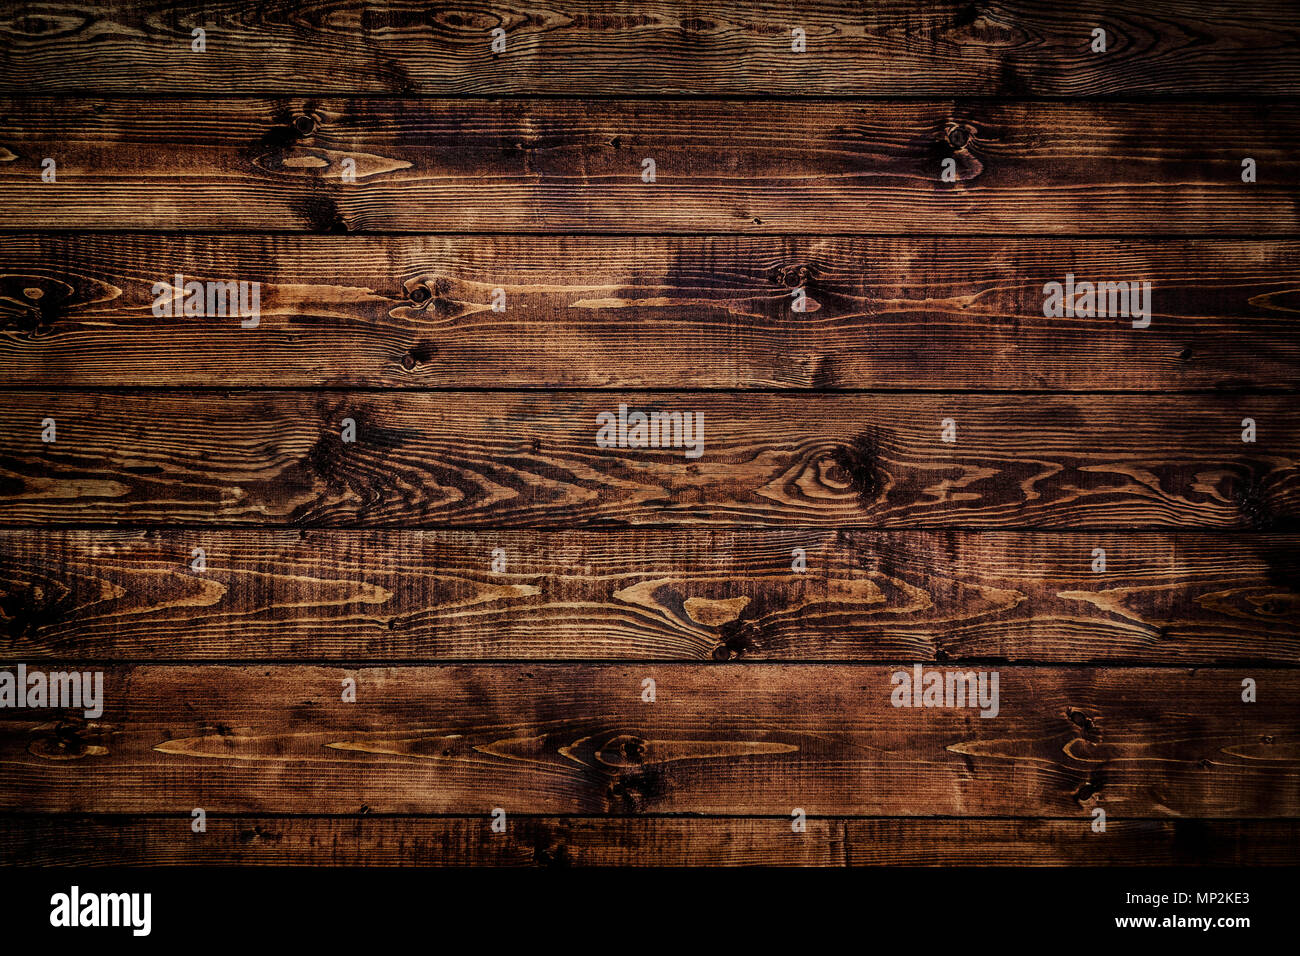 Old rich wood grain texture background with knots. Stock Photo